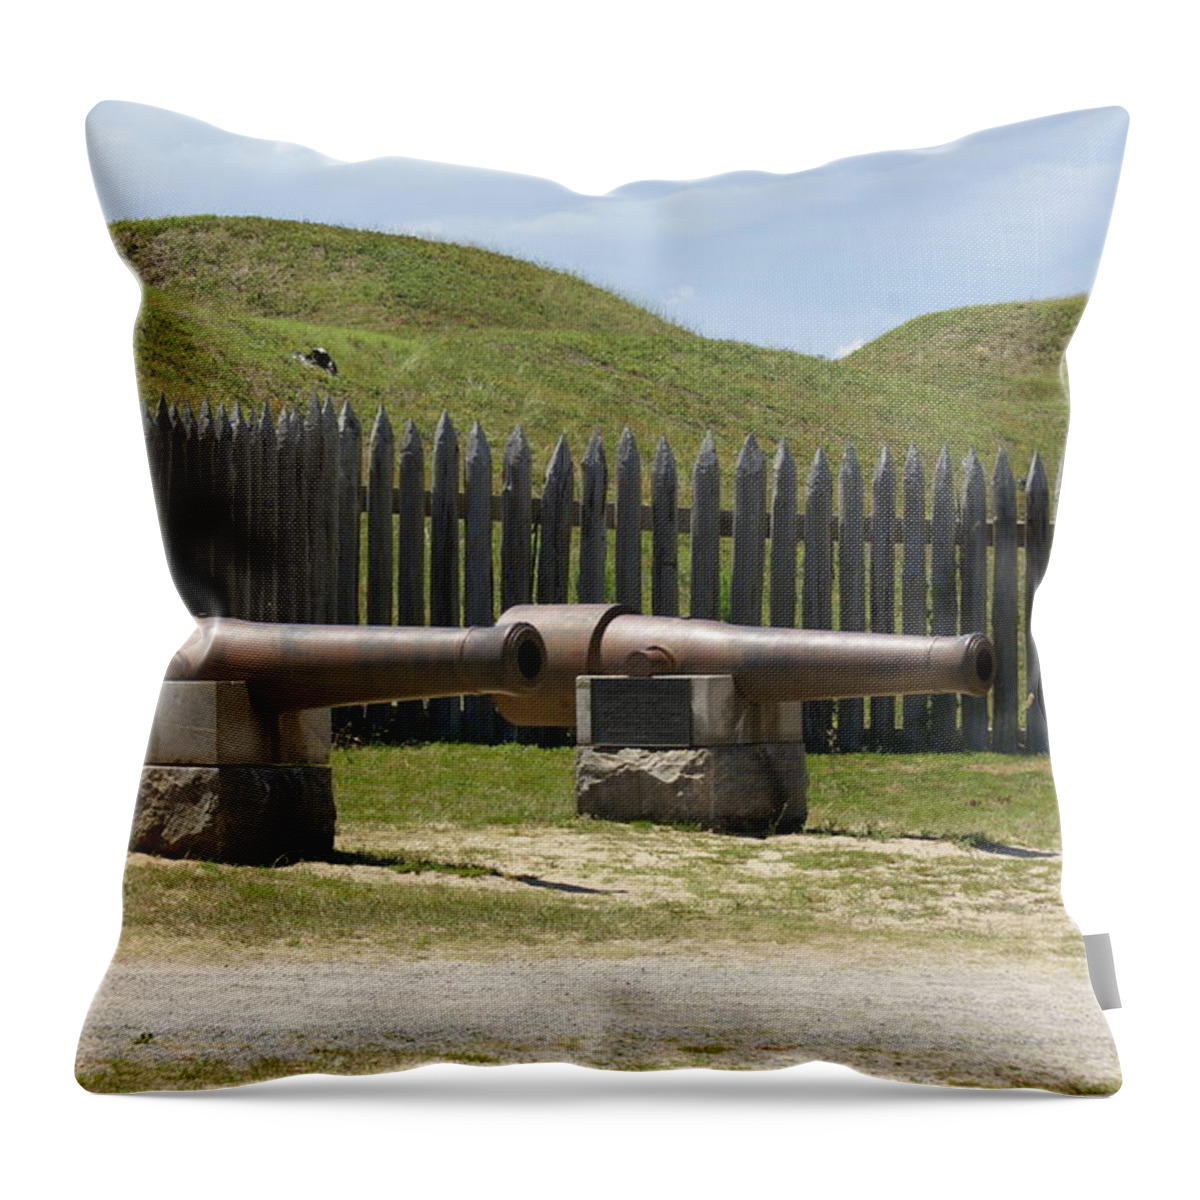  Throw Pillow featuring the photograph Fort Fisher Cannons by Heather E Harman